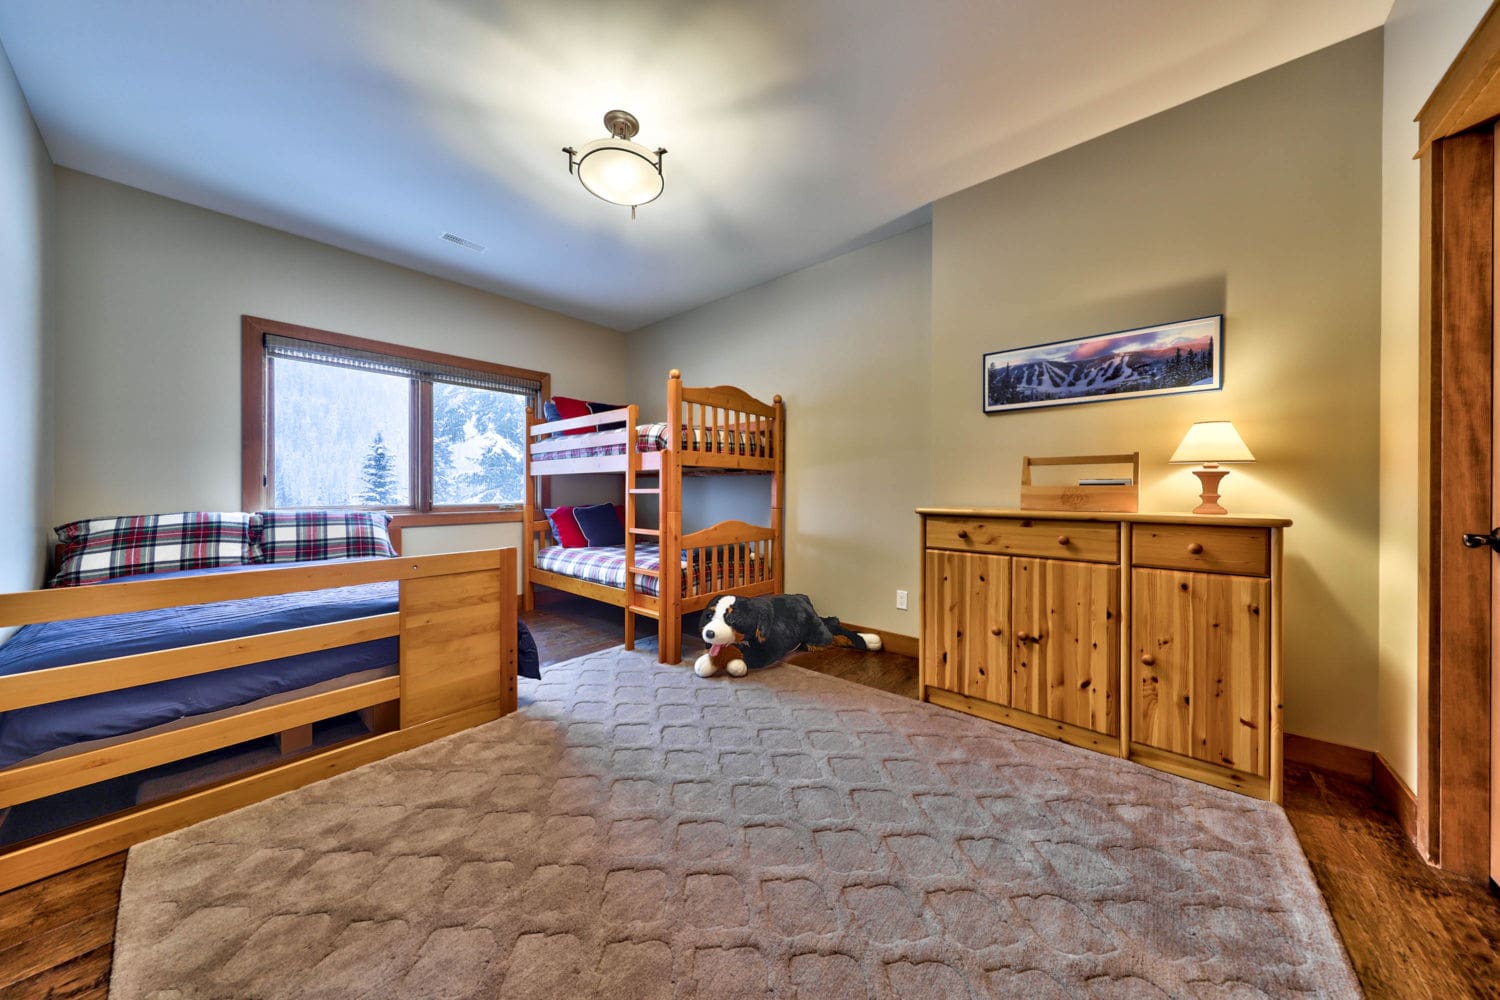 Rec room with bunk beds in timber frame log home